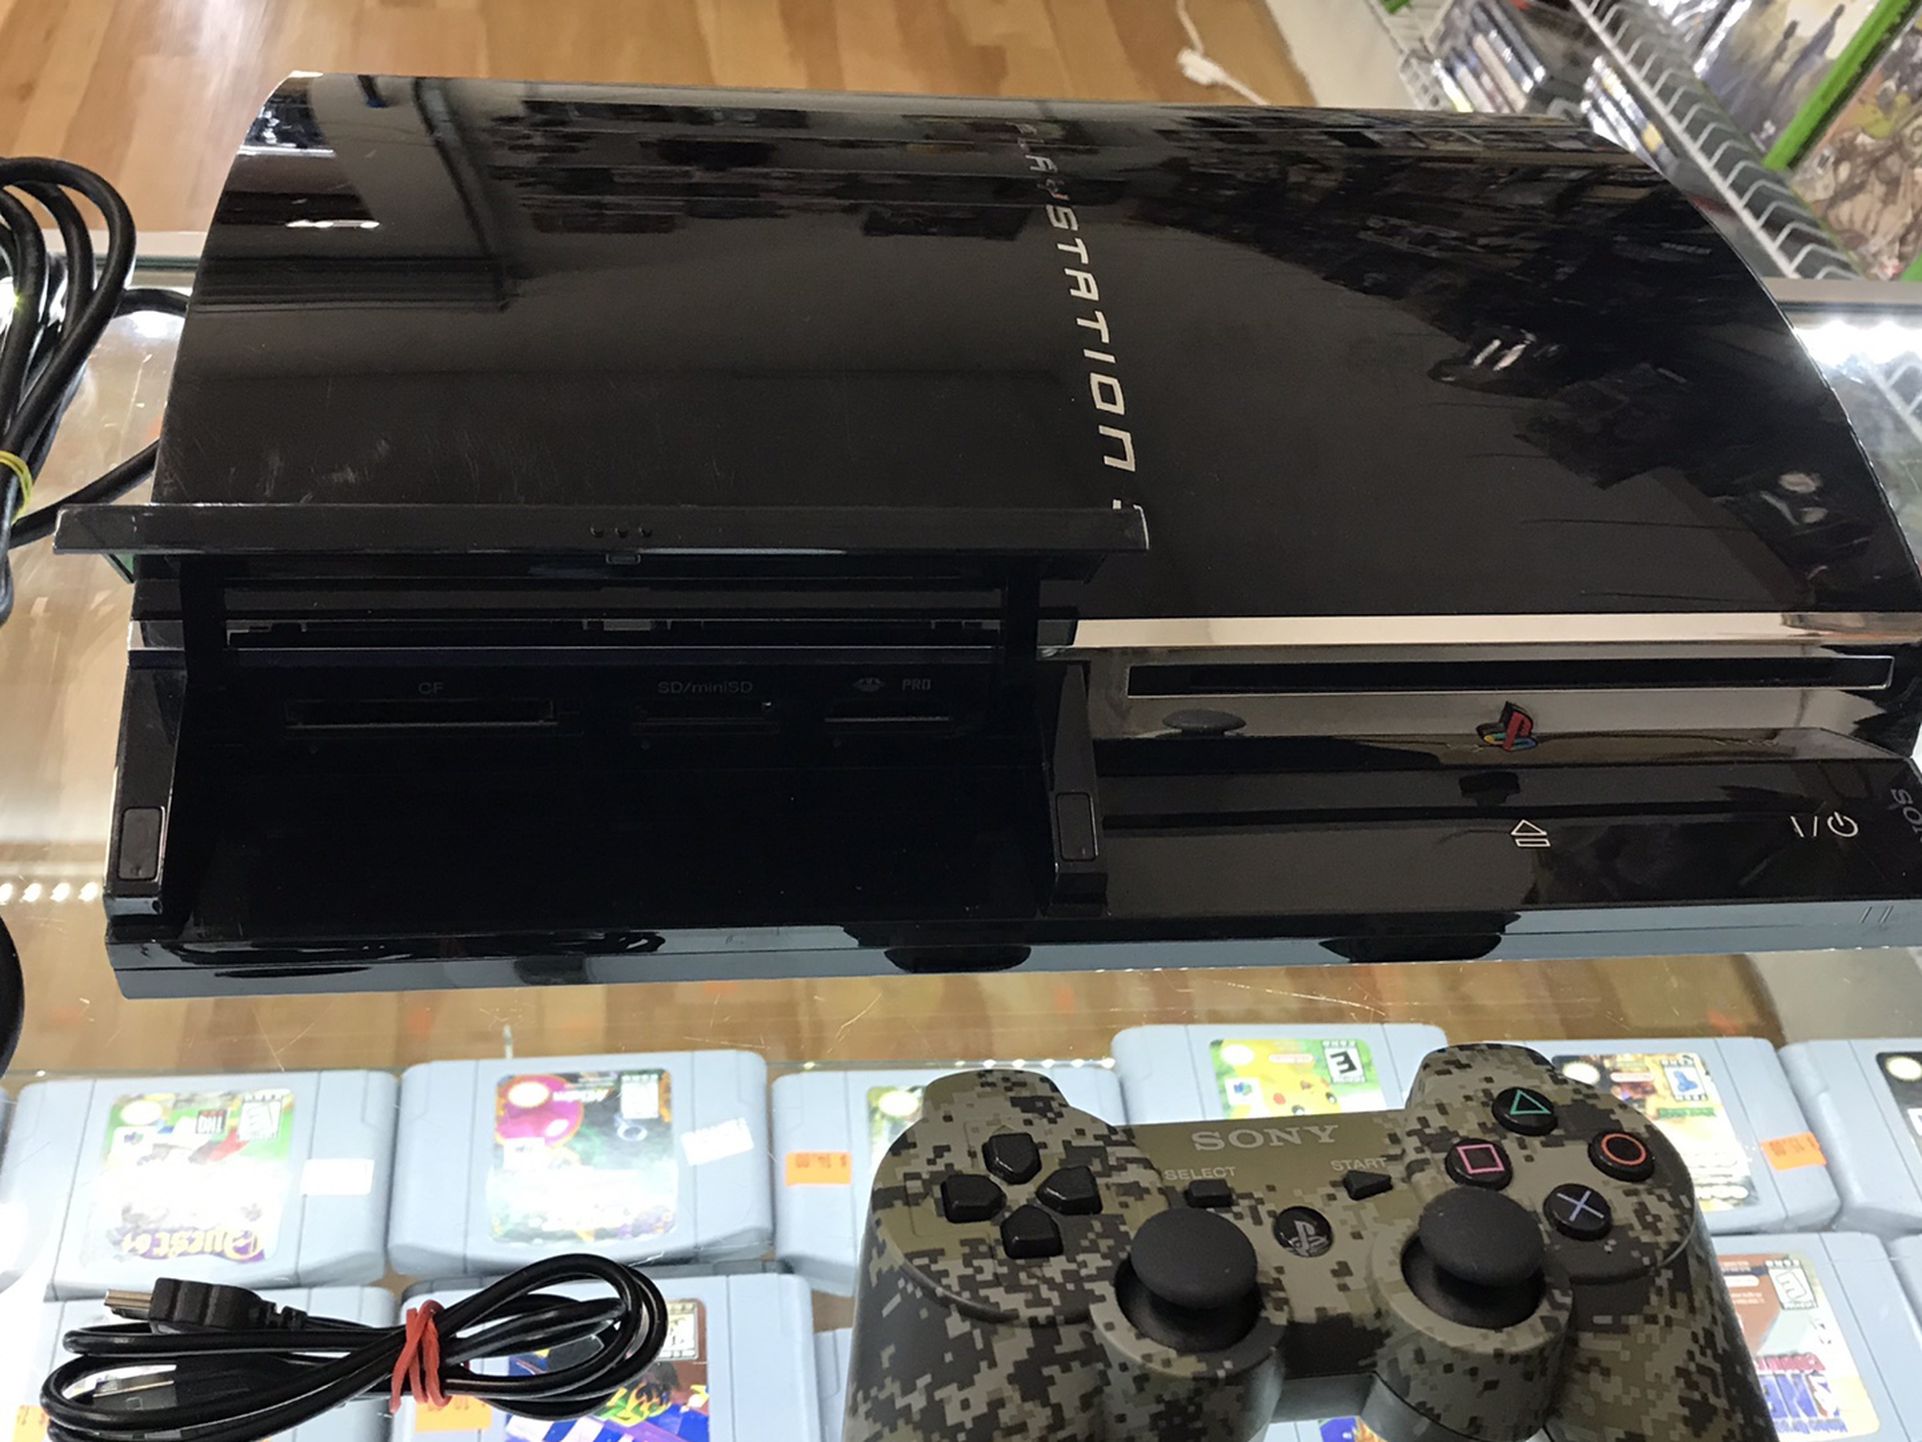 Sony PlayStation 3 60 GB Backwards Compatible System ( Plays PS1,PS2, and PS3 Games )